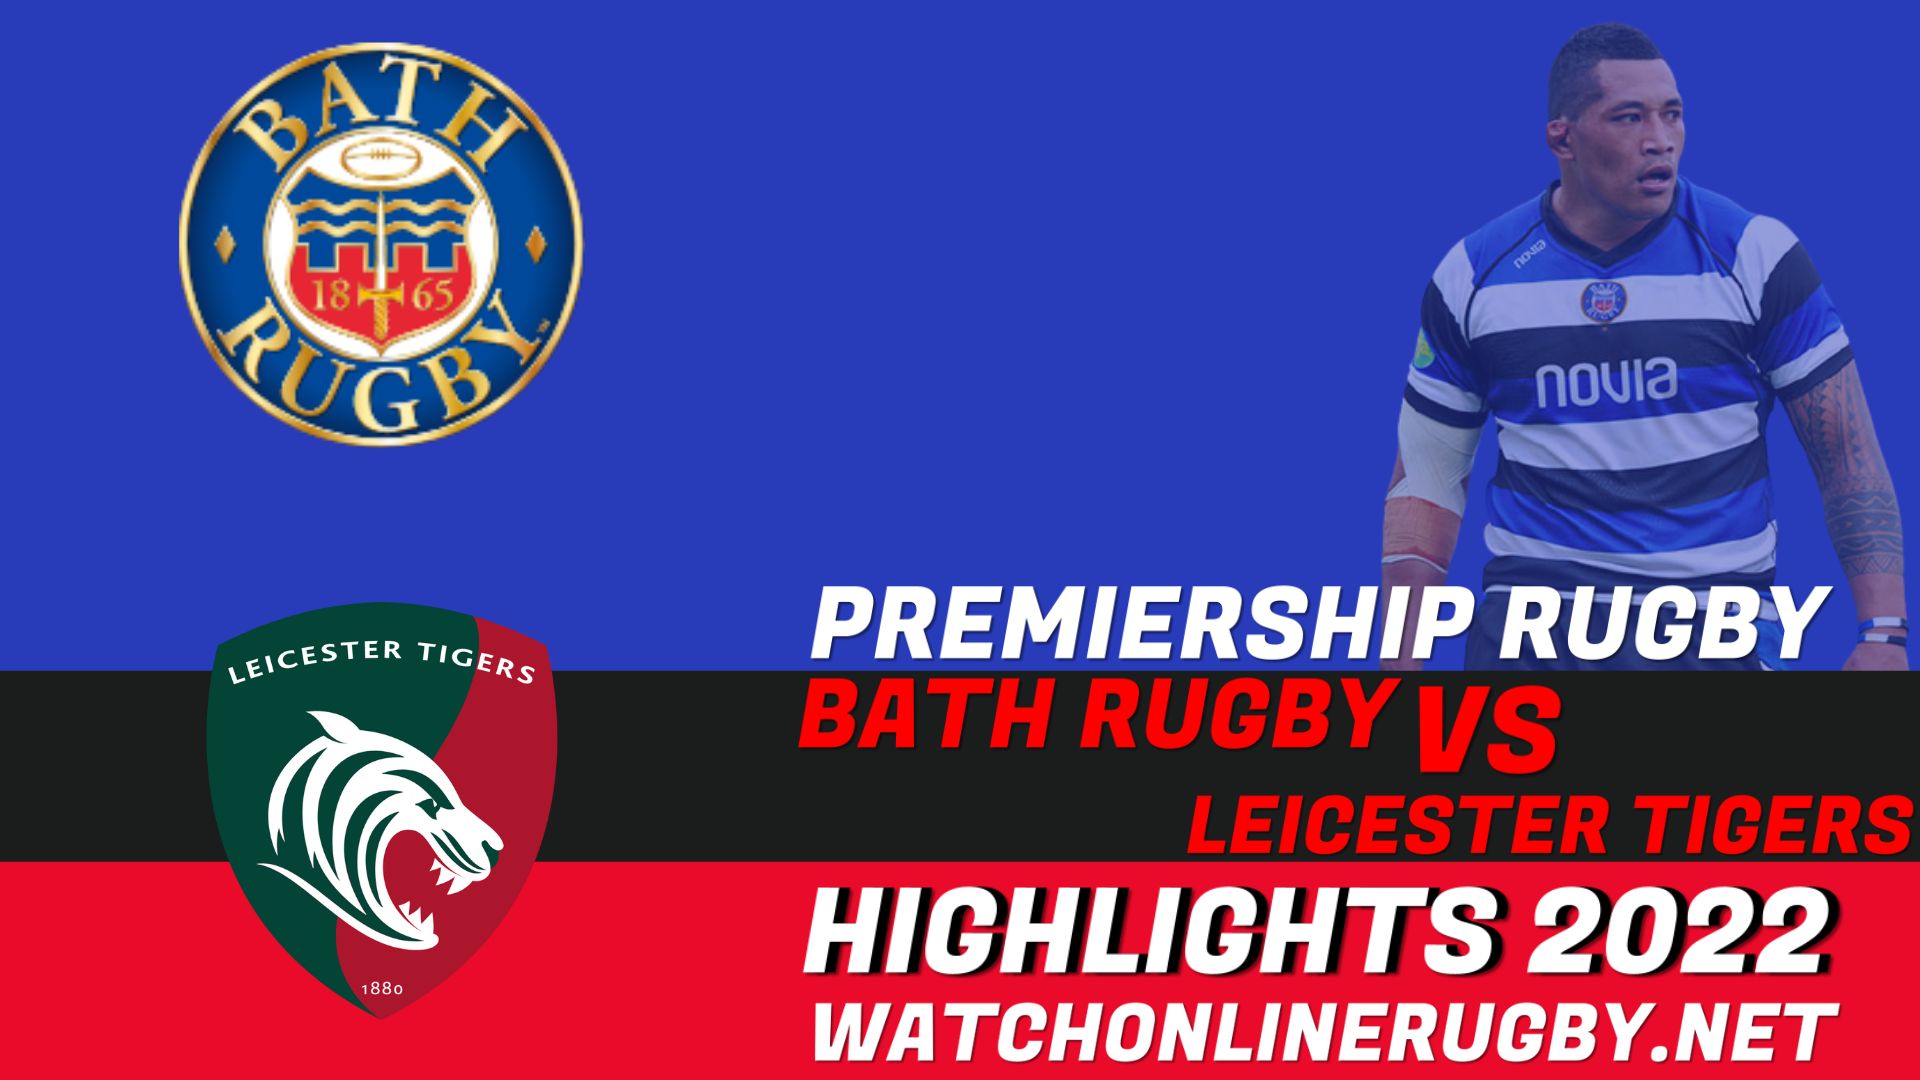 Bath Rugby Vs Leicester Tigers Premiership Rugby 2022 RD 17